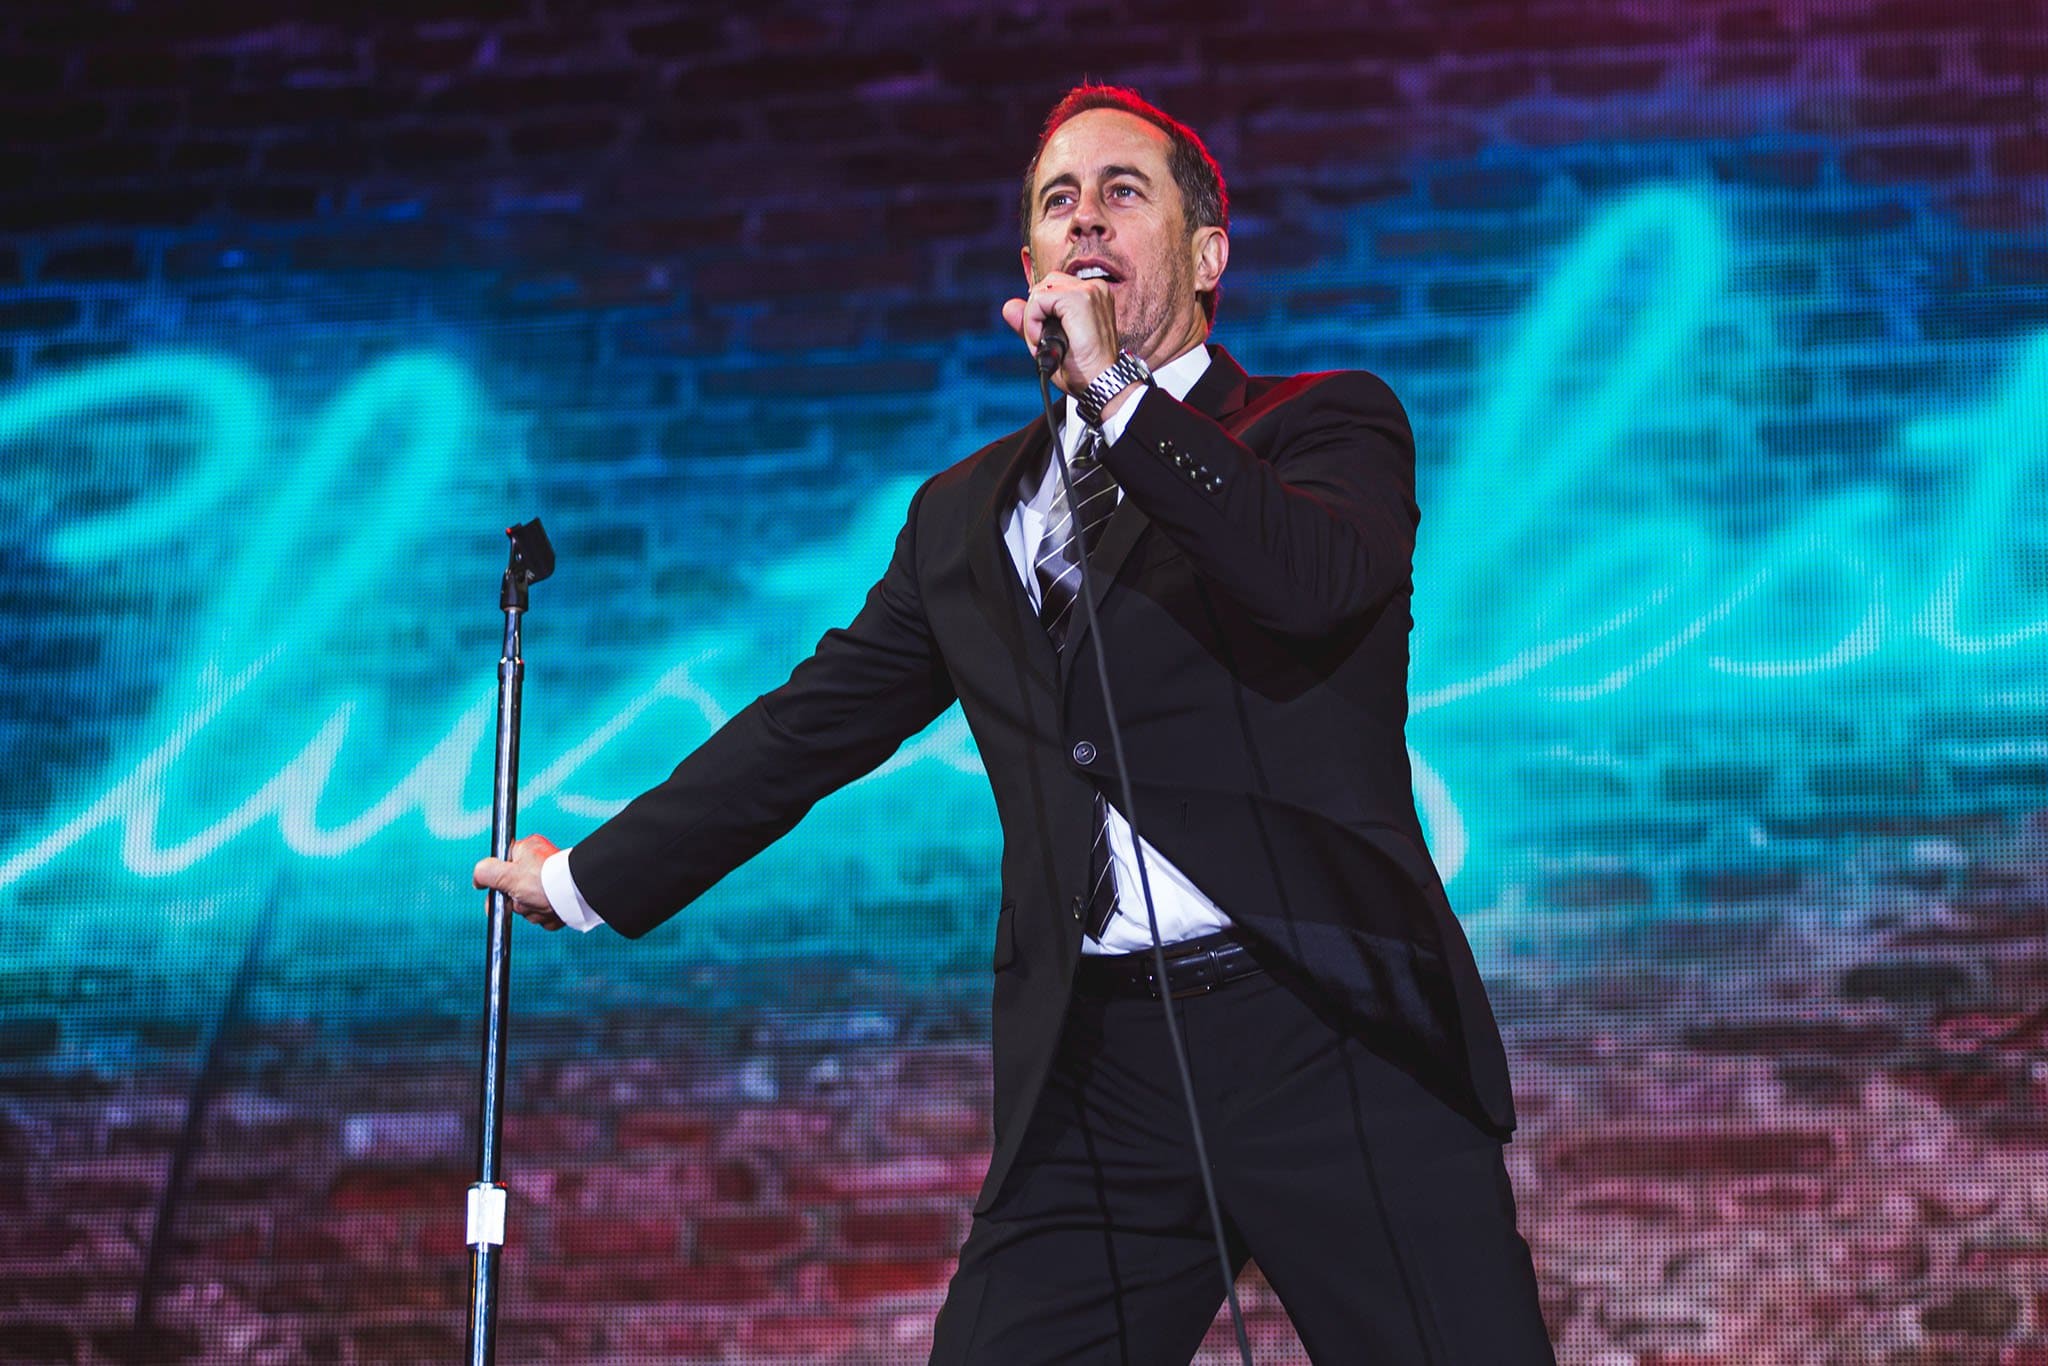 Jerry Seinfeld developed an interest in stand-up comedy after brief stints in college productions and rose to fame in 1989 when he created the sitcom Seinfeld